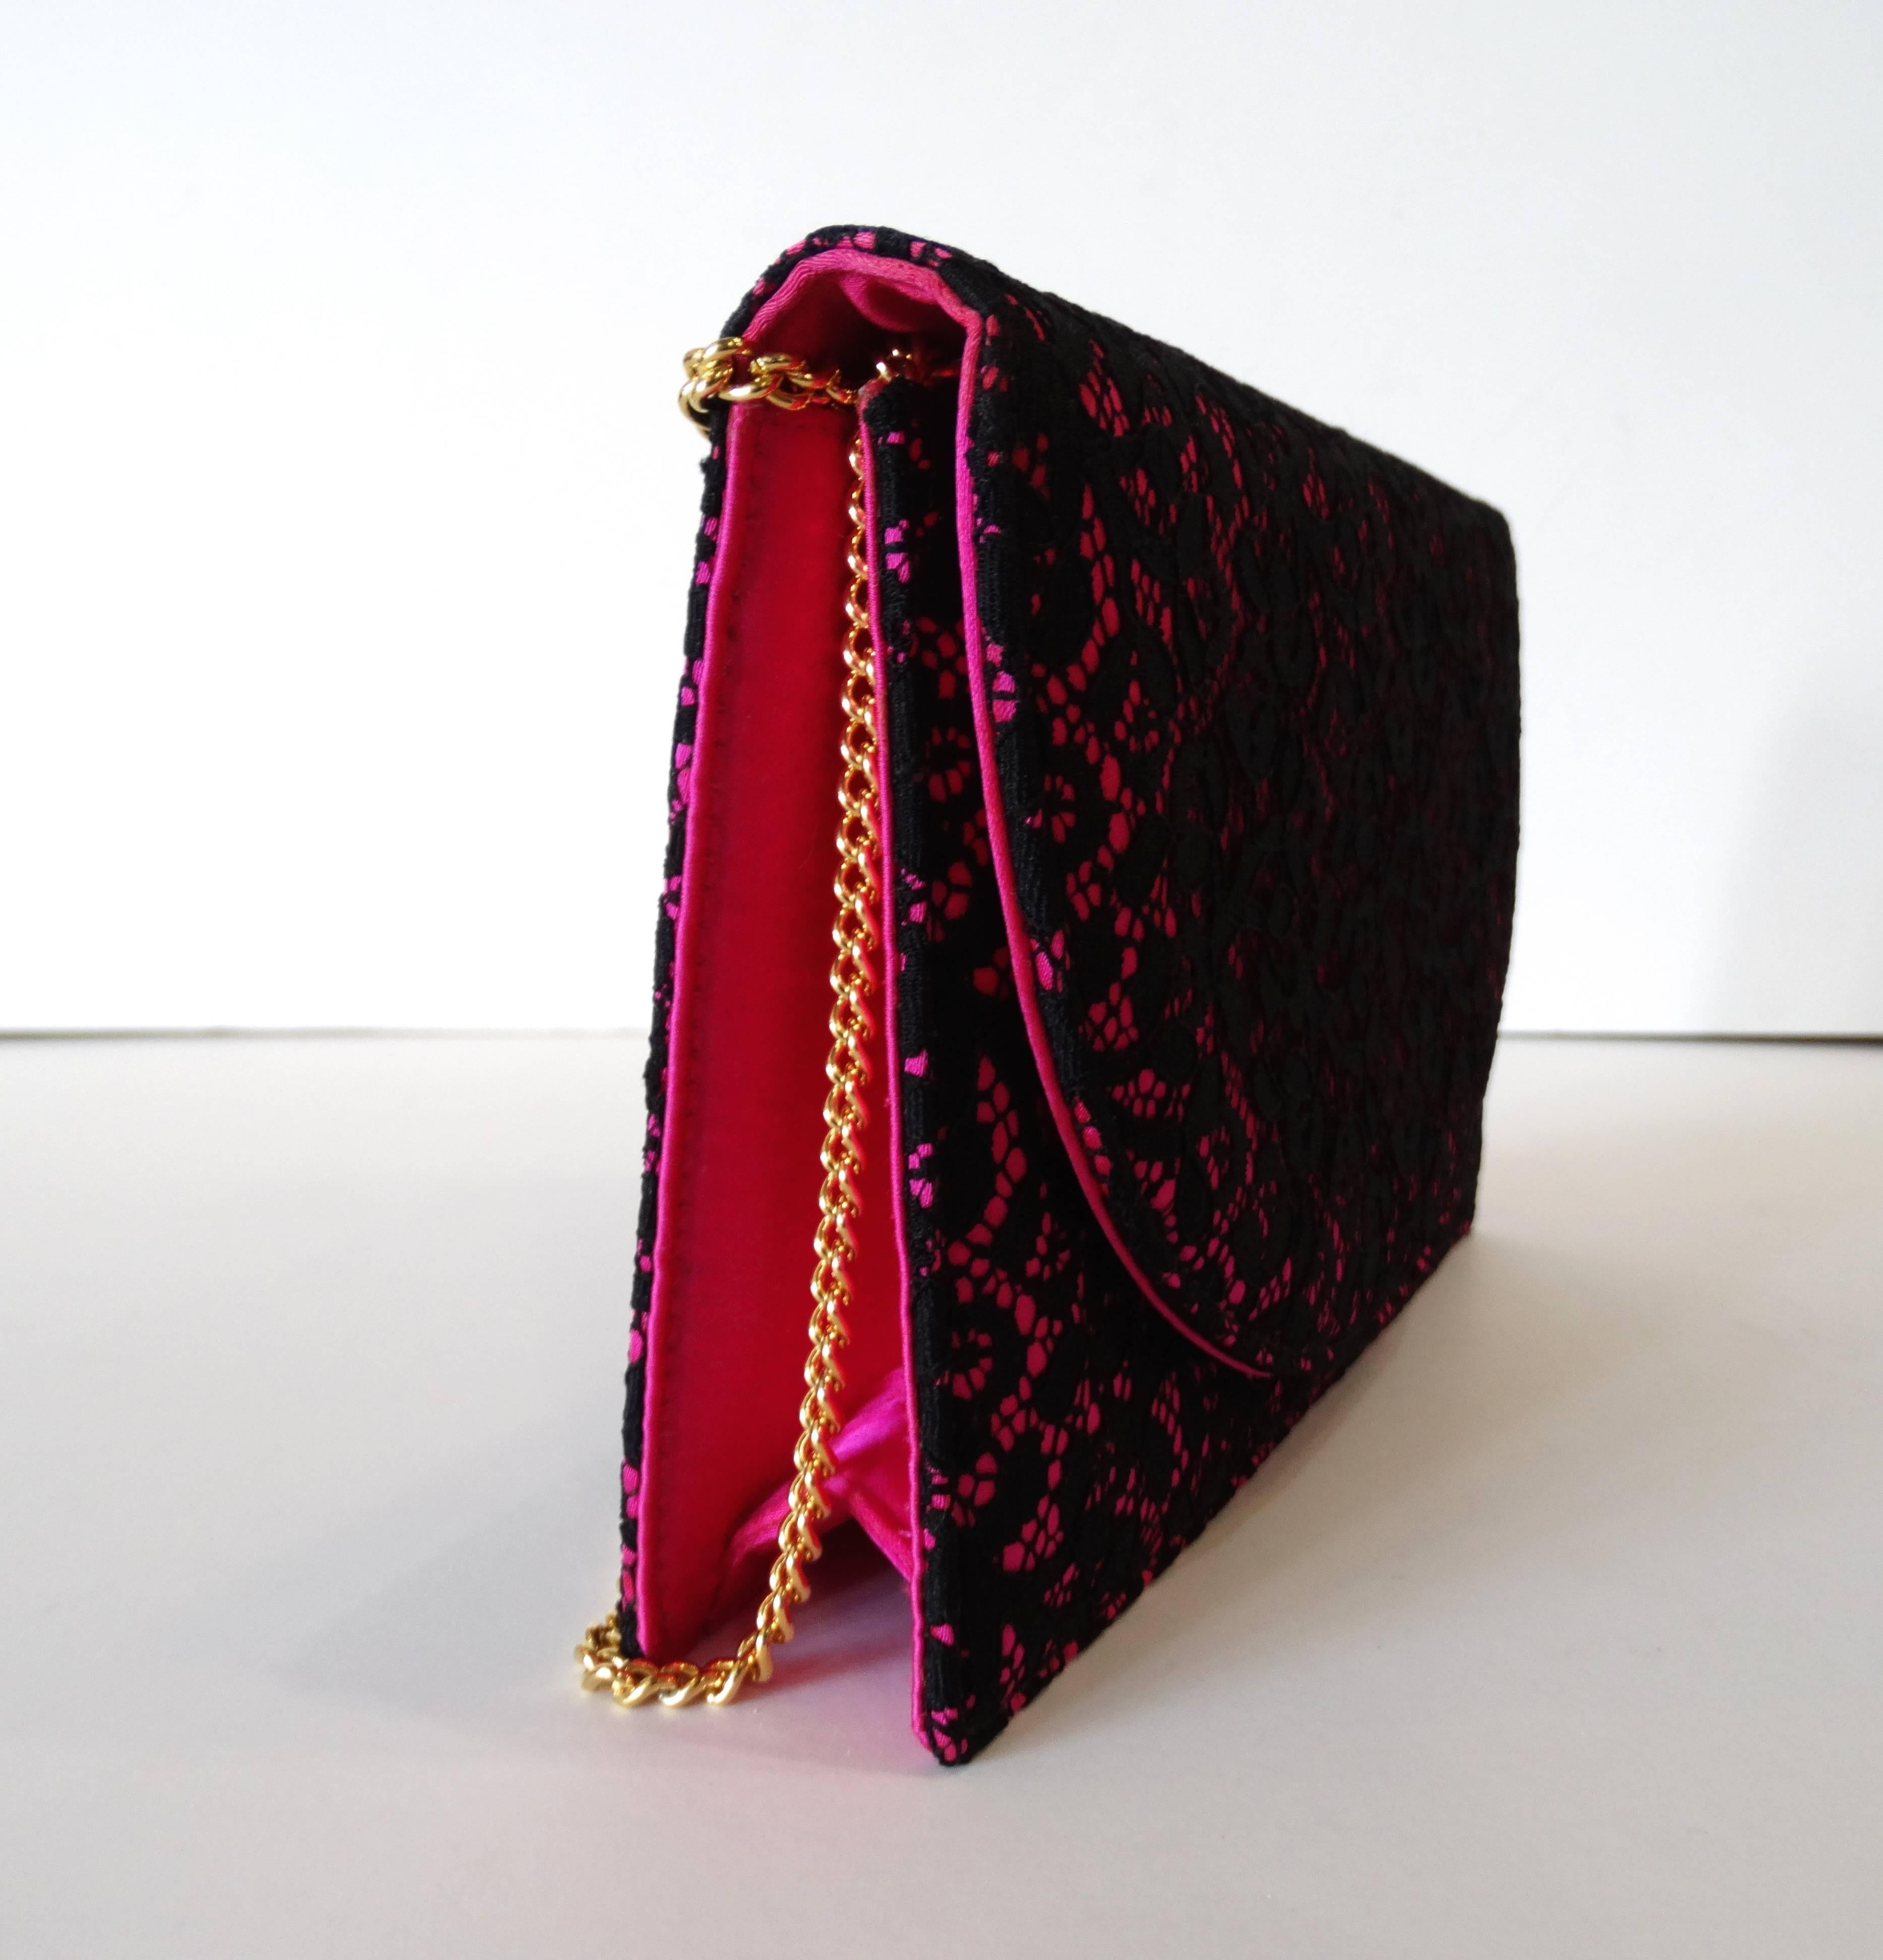 A fun 1990's Christian Dior Pink & Black  Shoulder Bag with Gold Chain. 3 ways to wear this gem! Bright pink satin with black lace floral pattern evening bag. It has flap with snap button closure and long gold tone color chain strap. Interior is